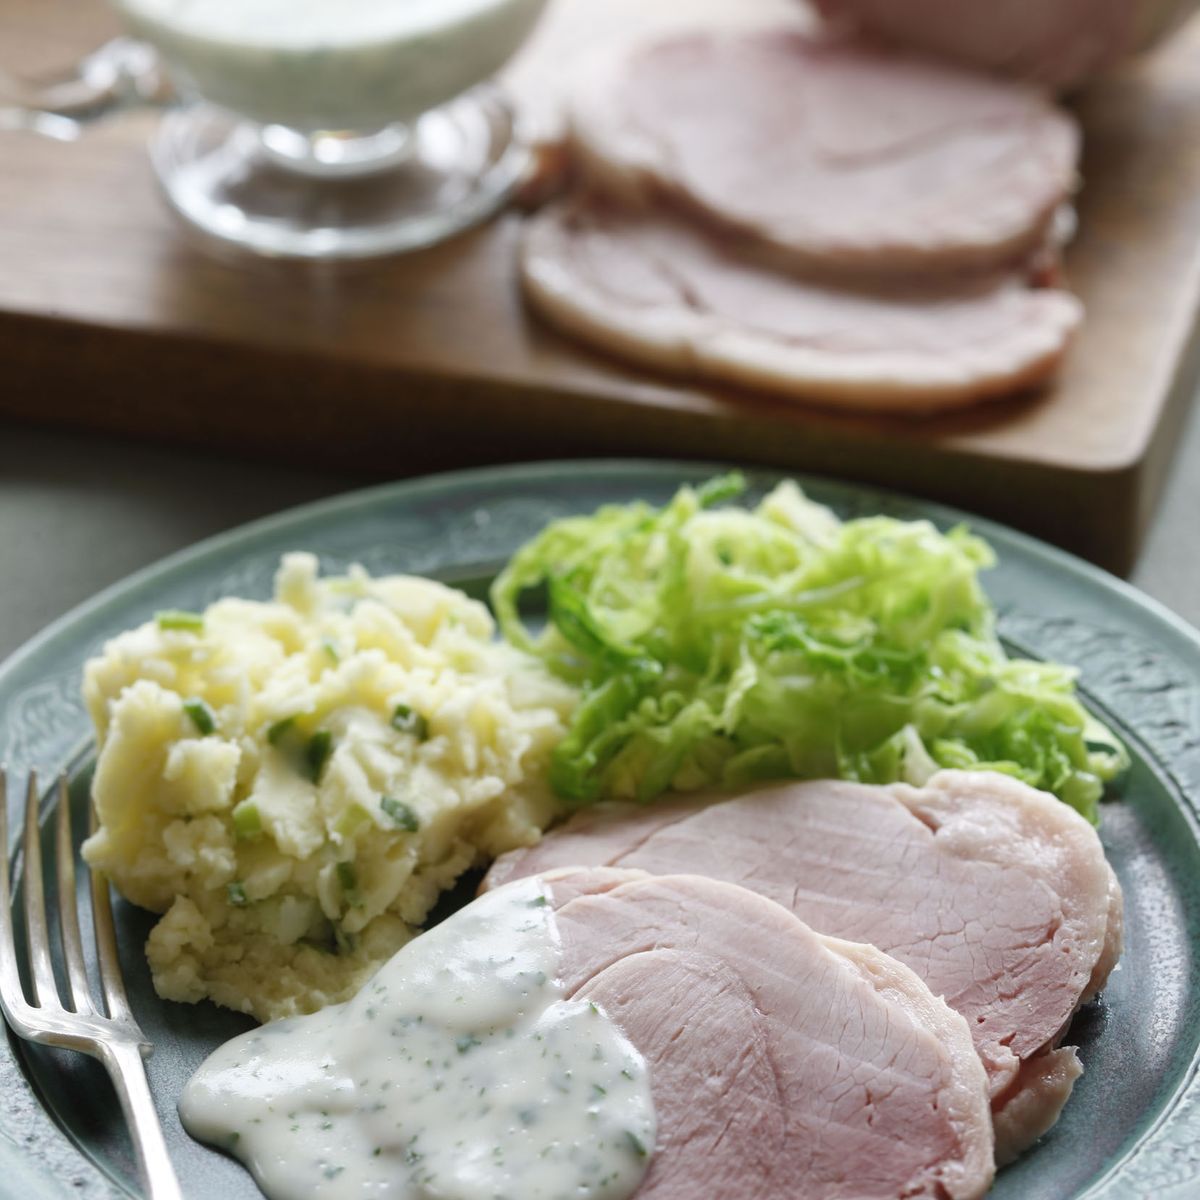 Best Boiled Bacon Recipe - How To Make Irish Boiled Bacon and Cabbage